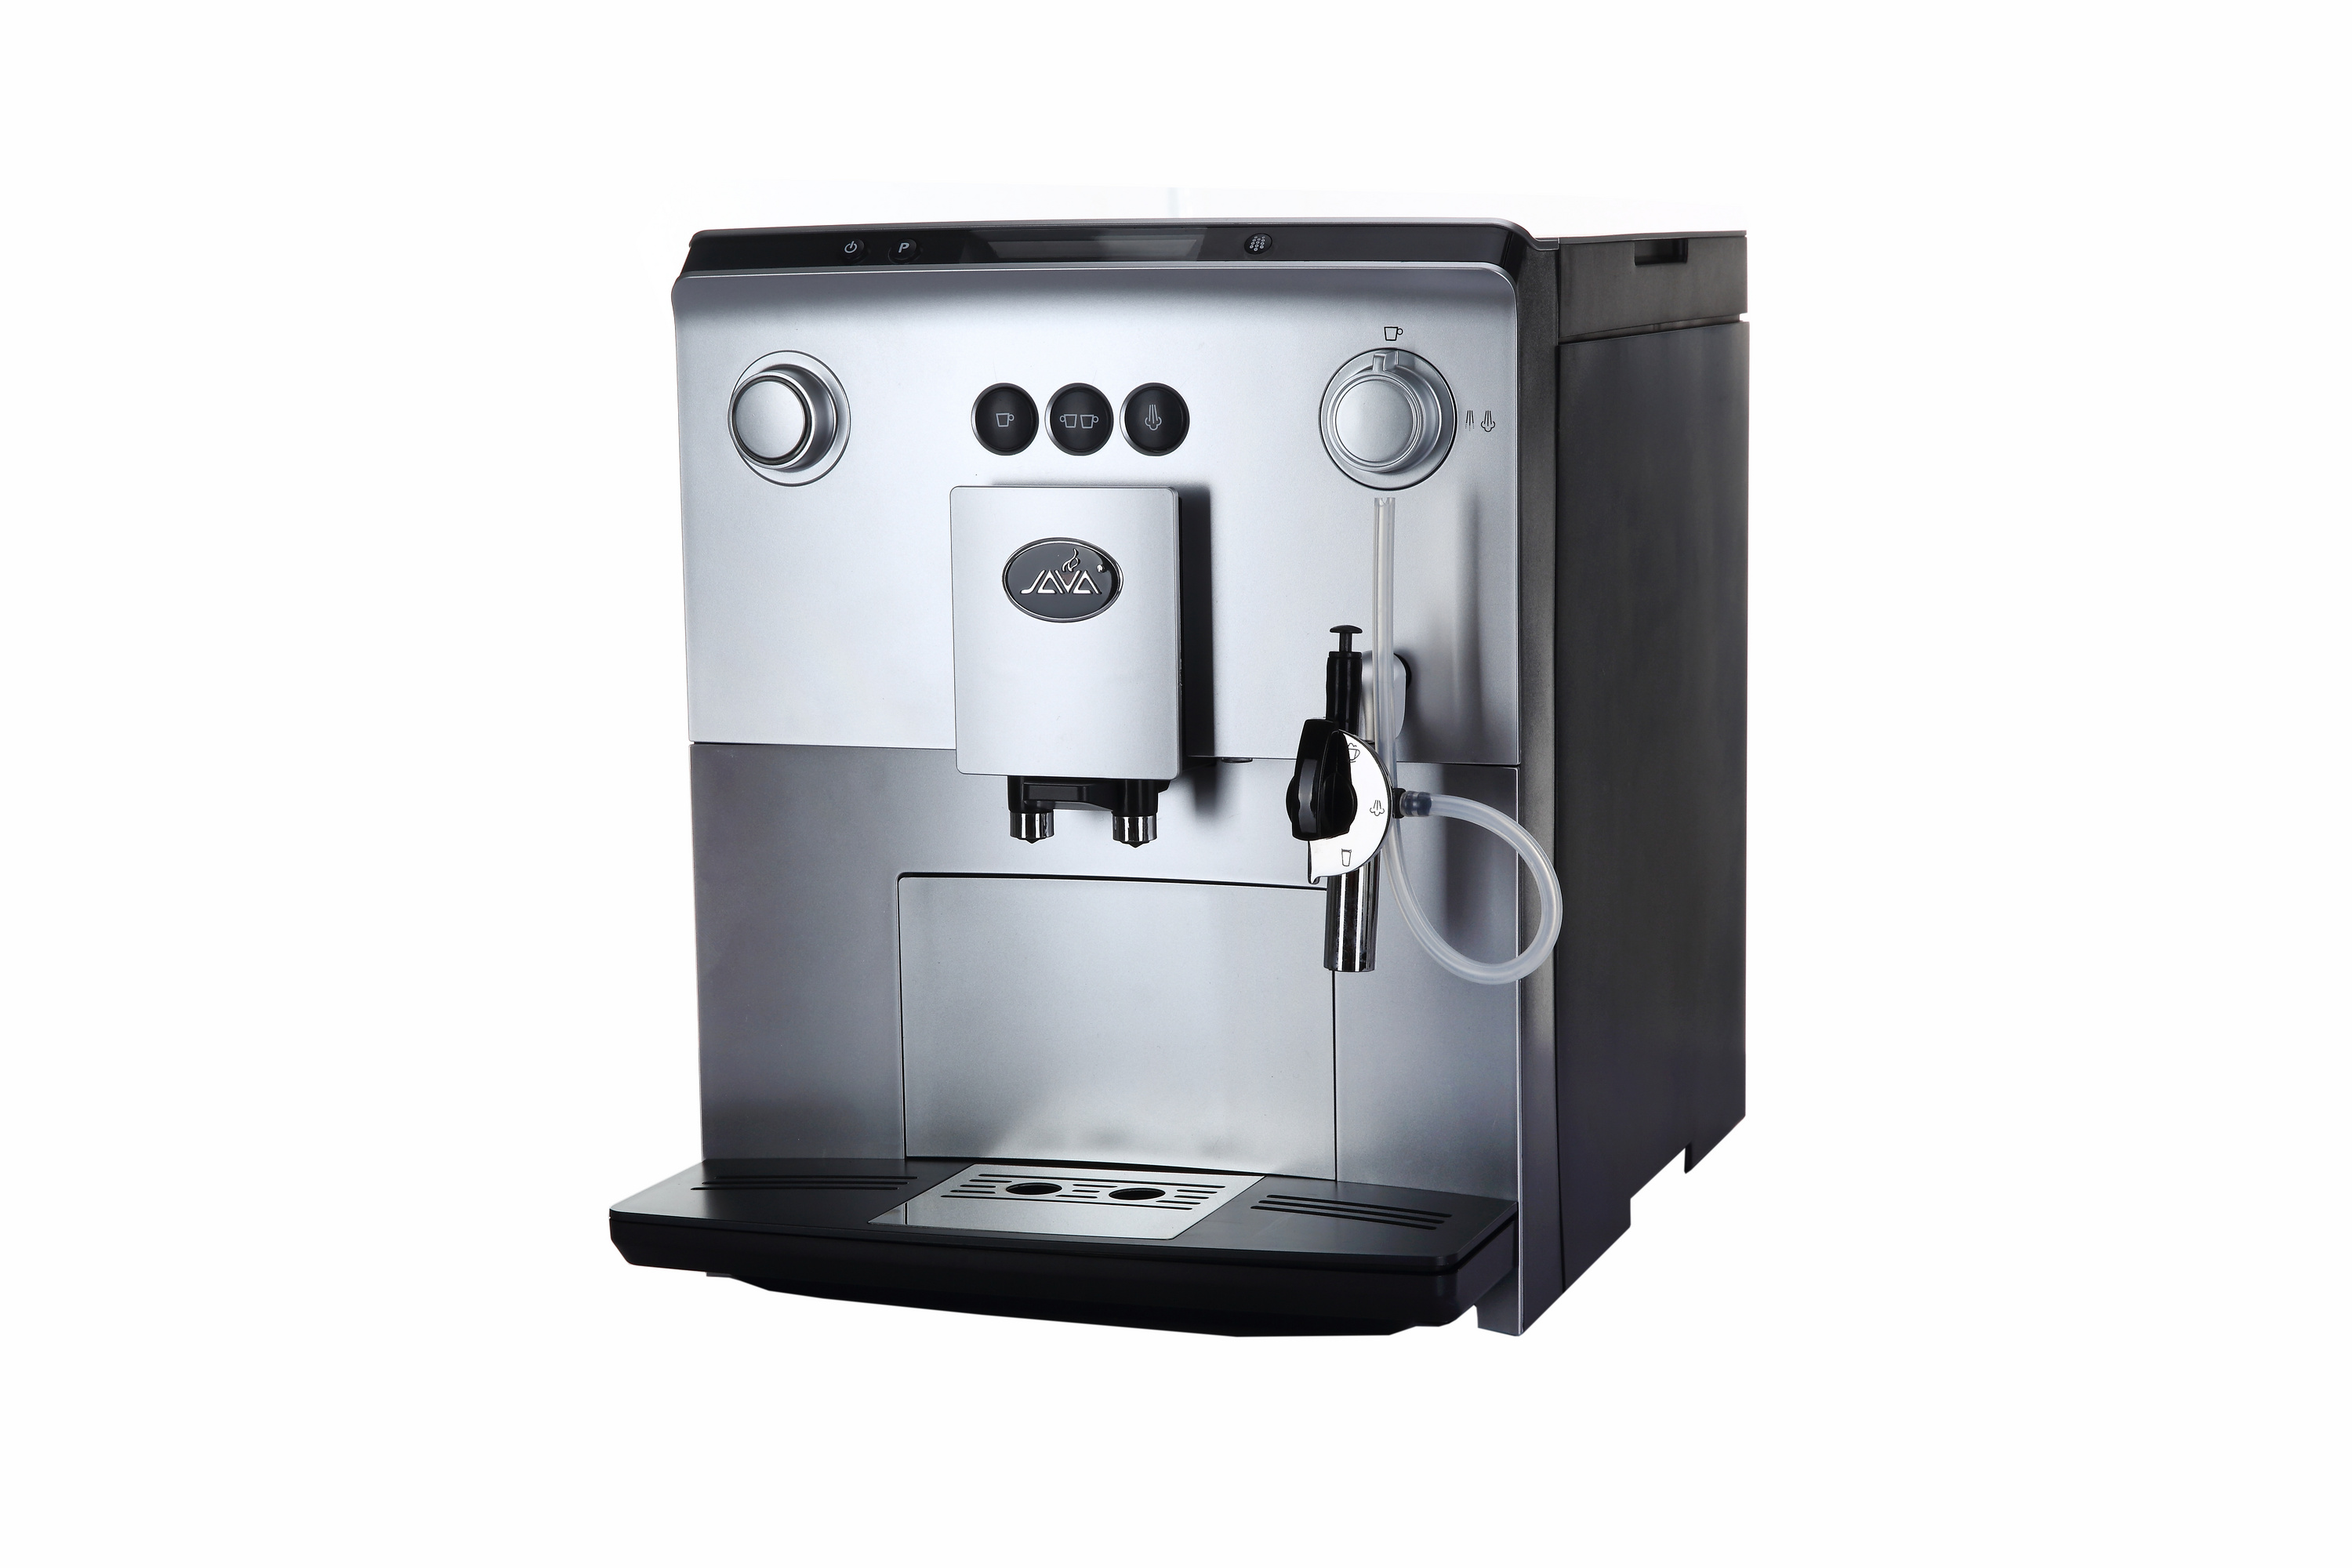 Hot selling commercial automatic espresso coffee machine for business and home